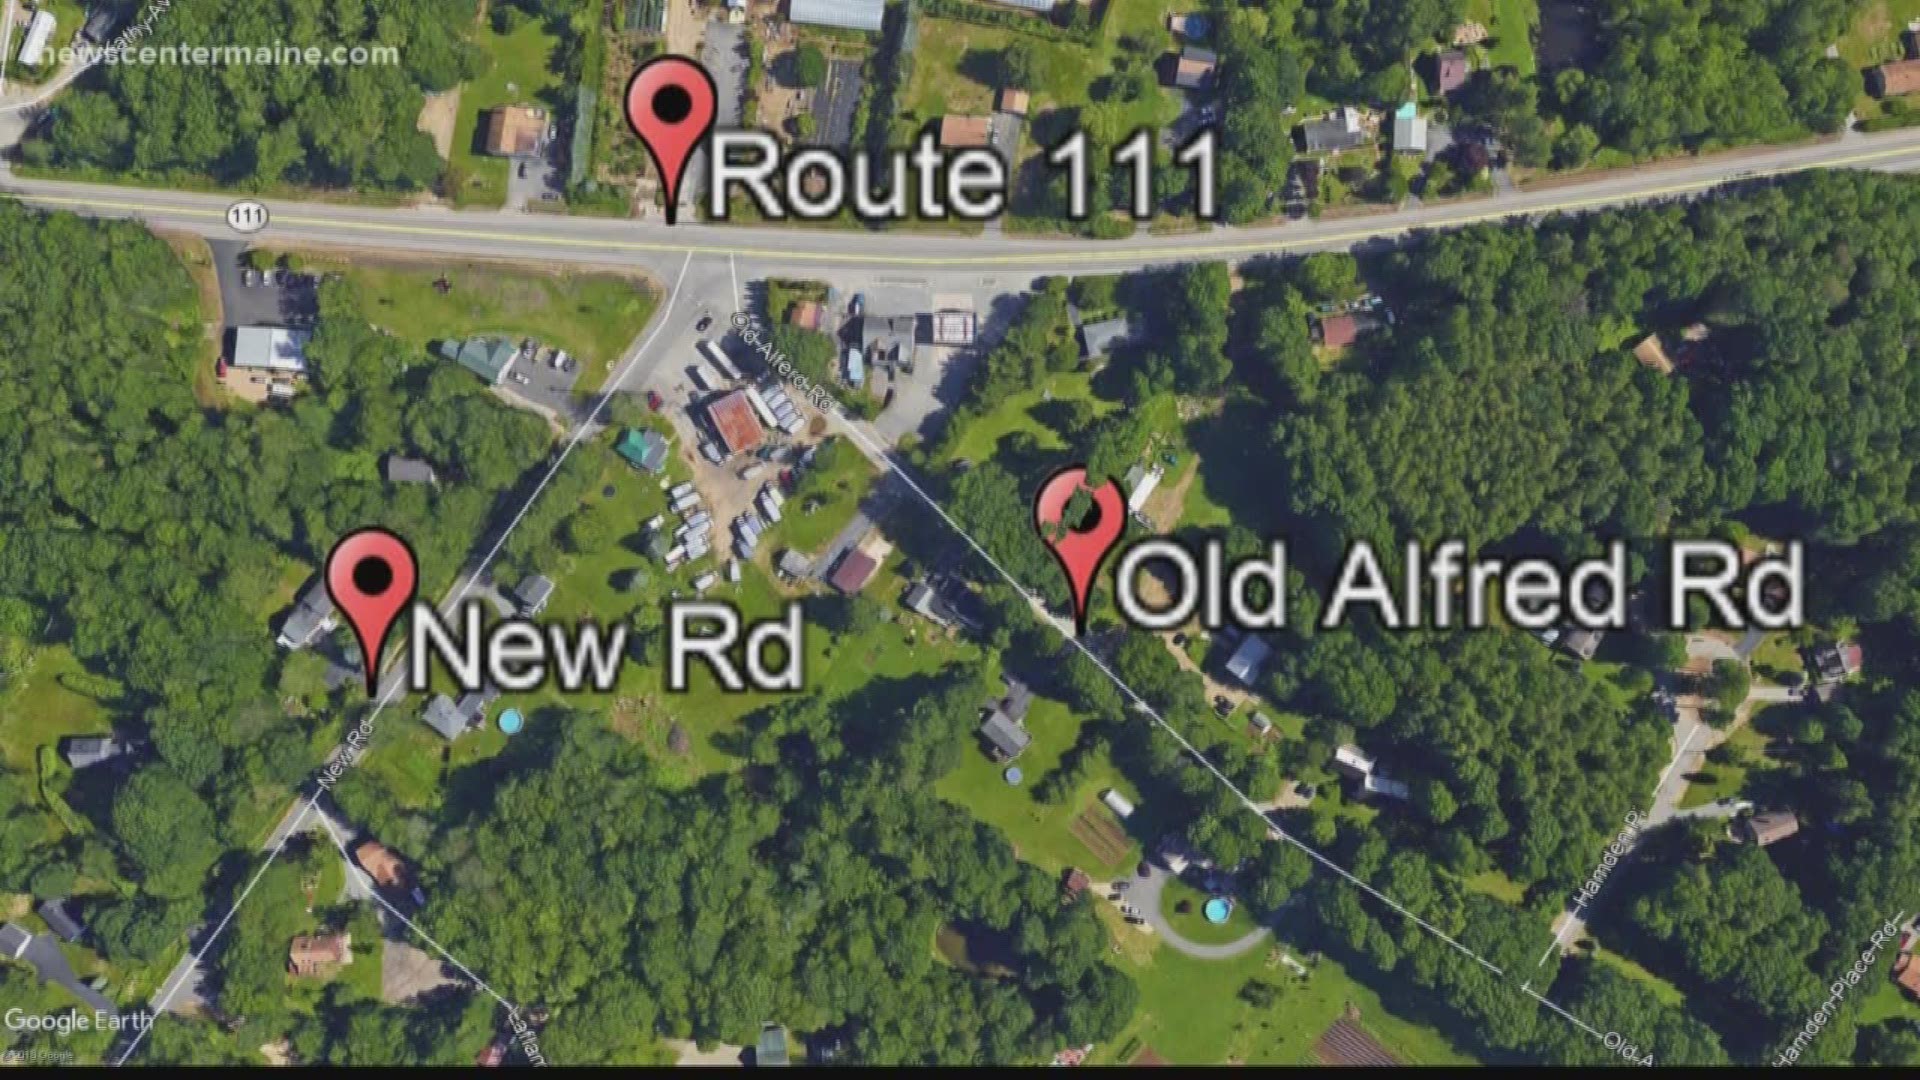 Work begins on intersection in Arundel that has been the site of many accidents